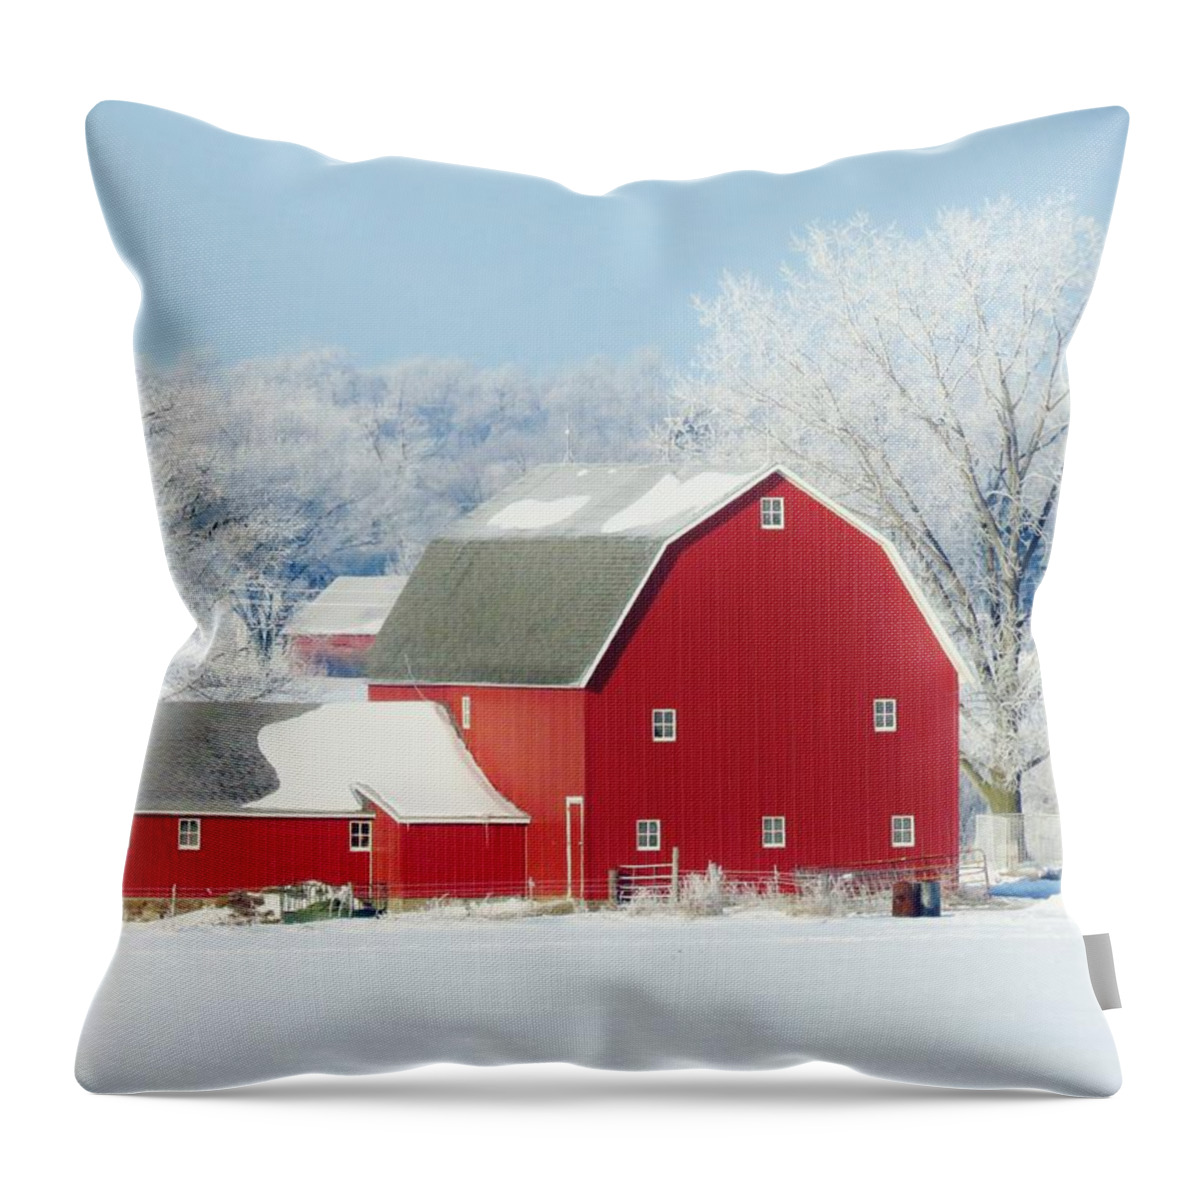 Barns Throw Pillow featuring the photograph Red Barn In Winter by Lori Frisch